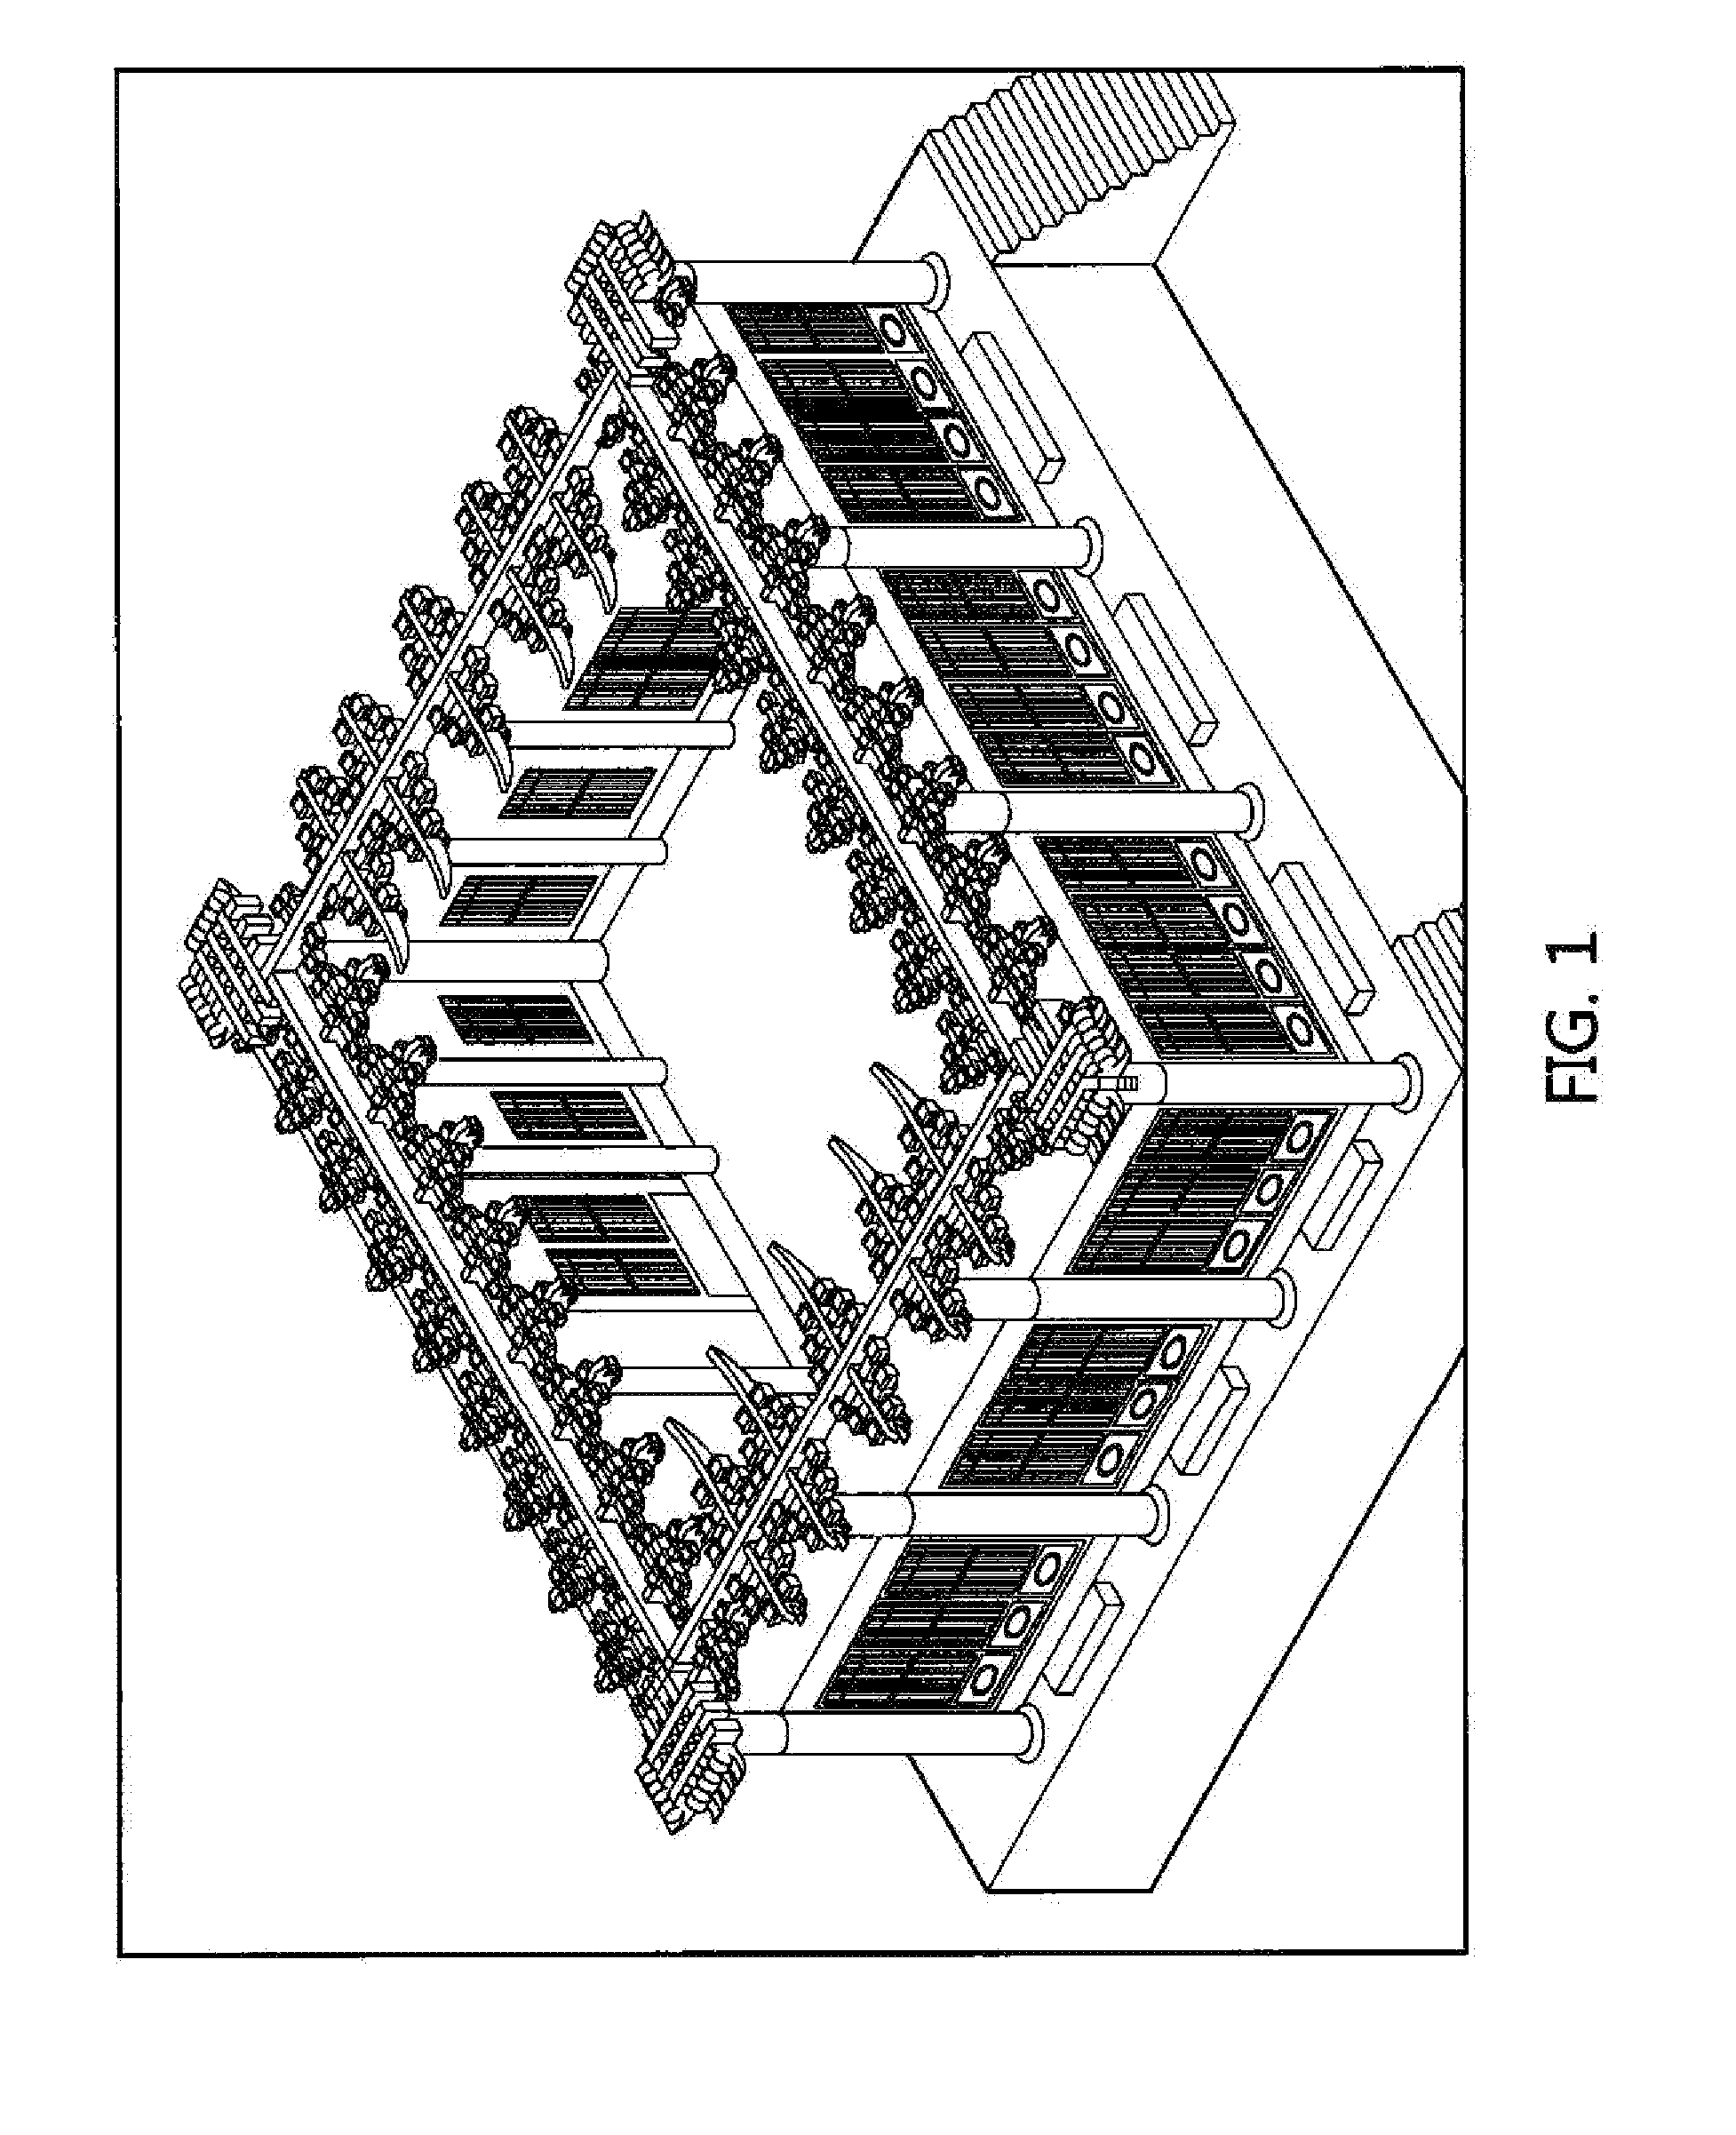 Apparatus and method for modeling cultural heritage building